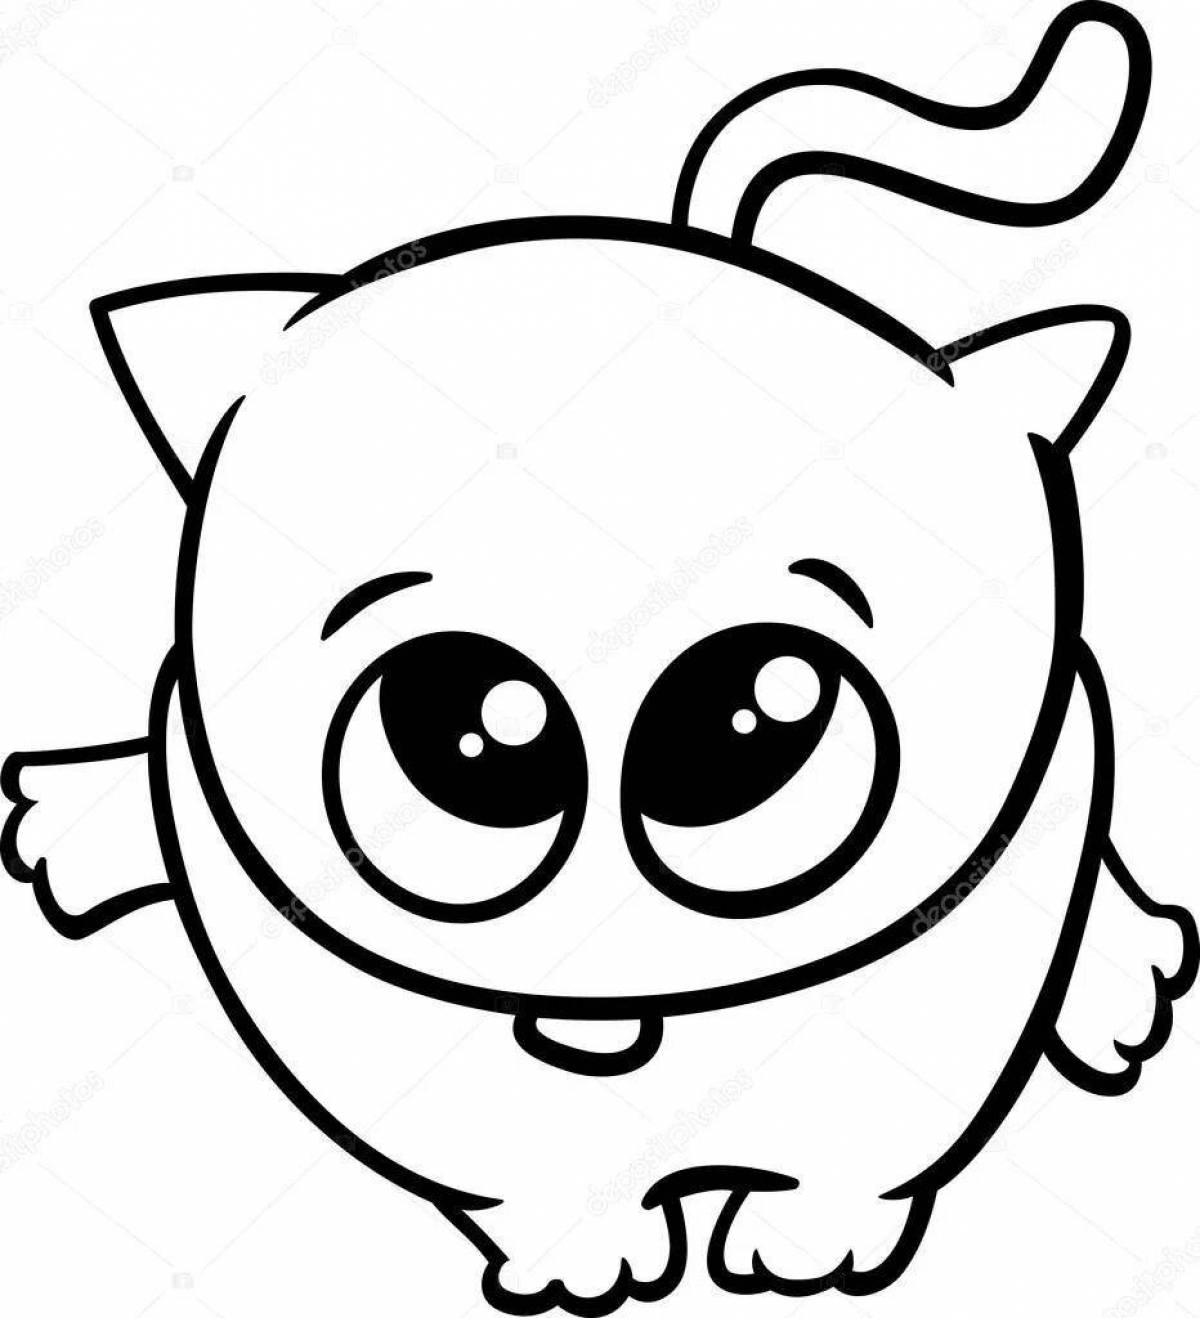 Coloring page chubby cat